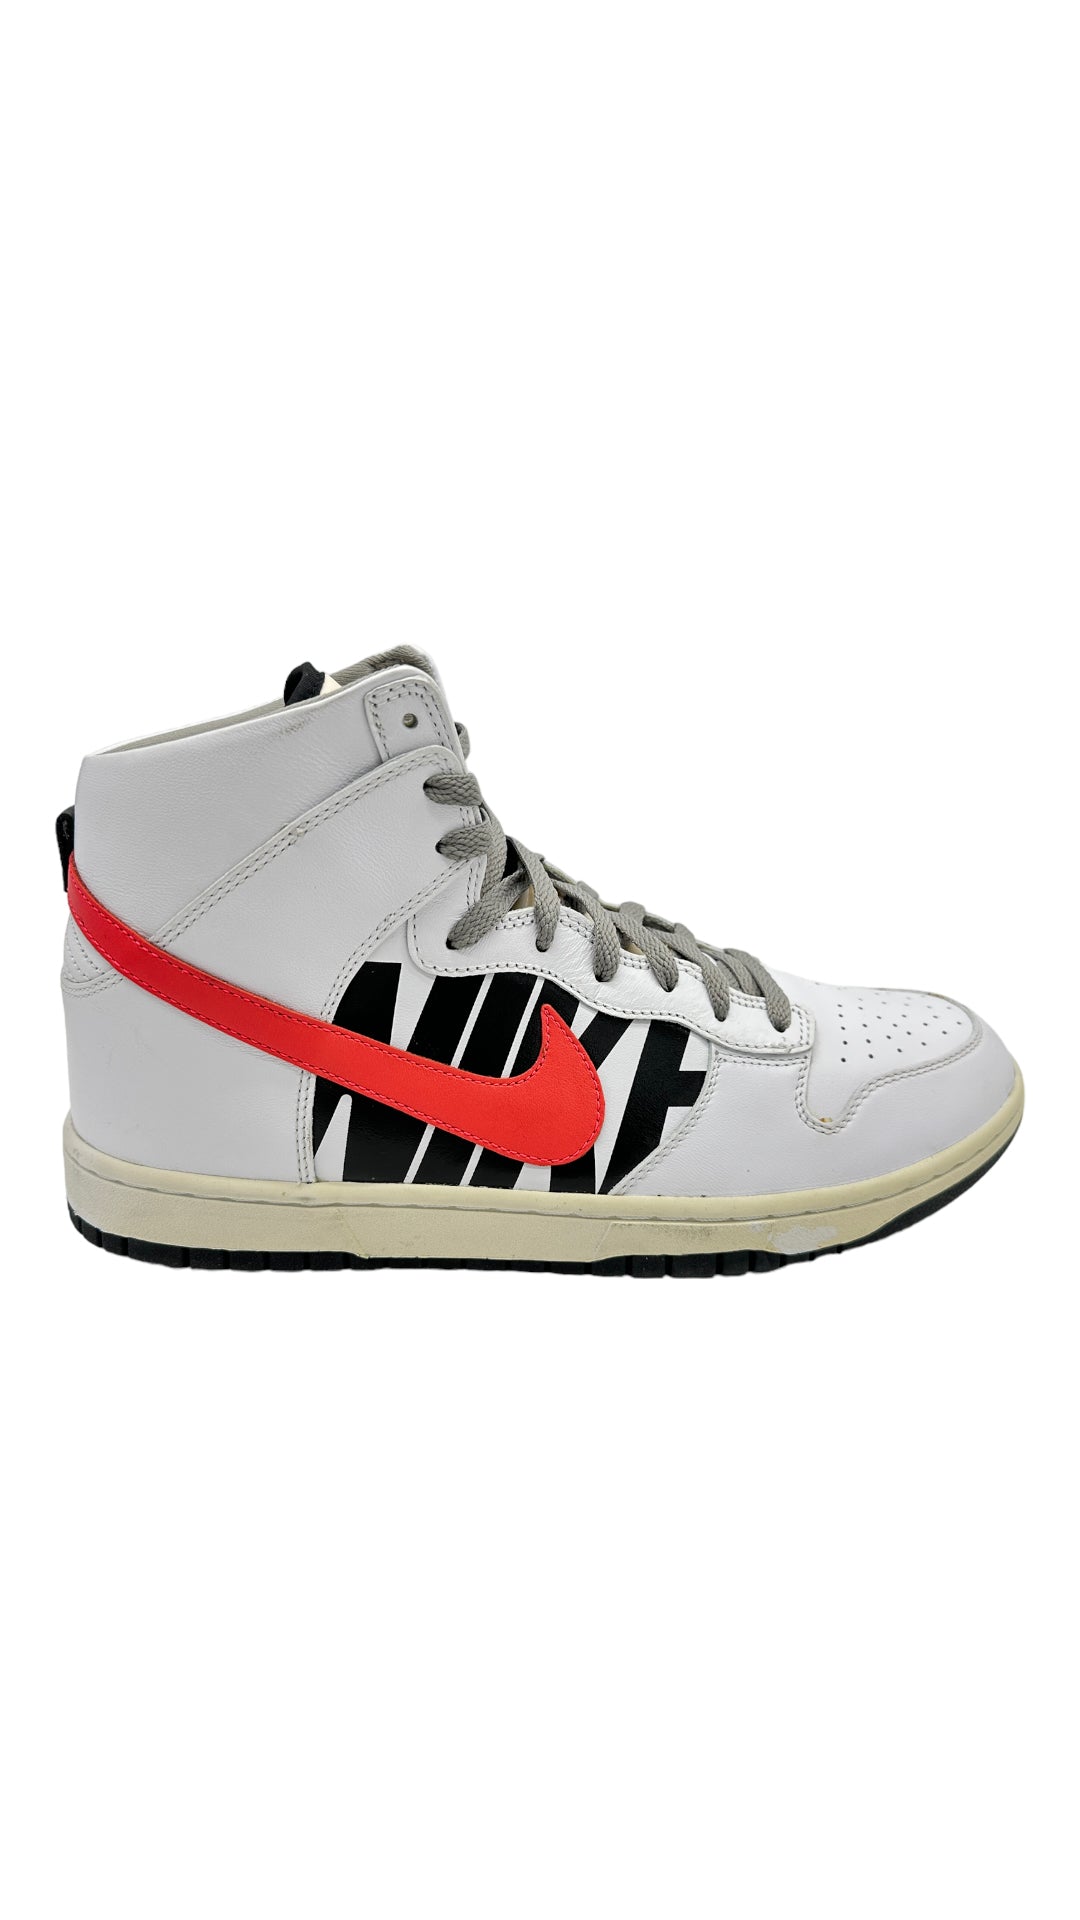 Preowned Undefeated x NikeLab Dunk High Lux 'Undefeated' Sz 12M/13.5W